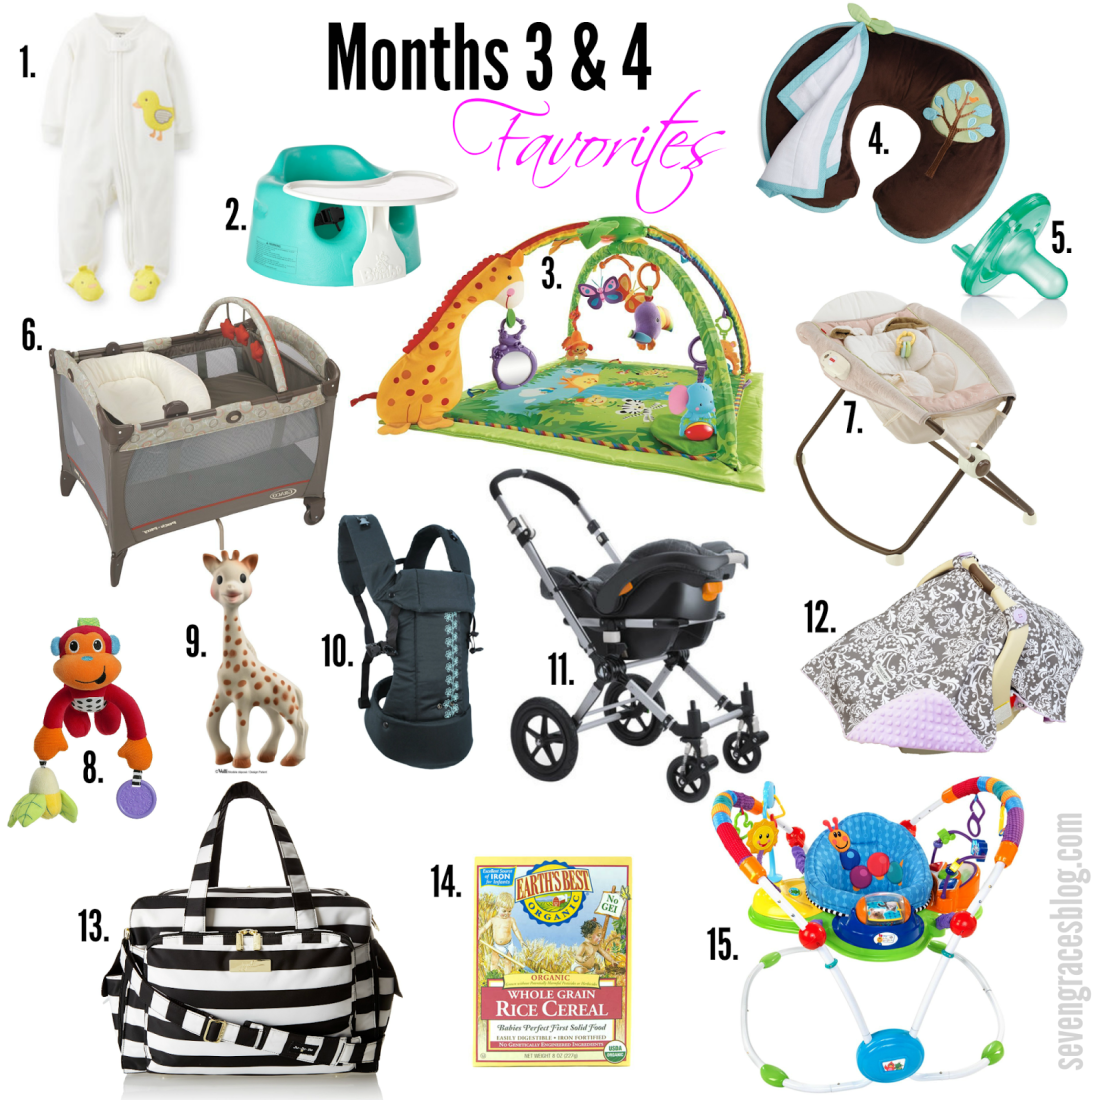 Top 15 Baby Items for Months 3 & 4 - Seven Graces